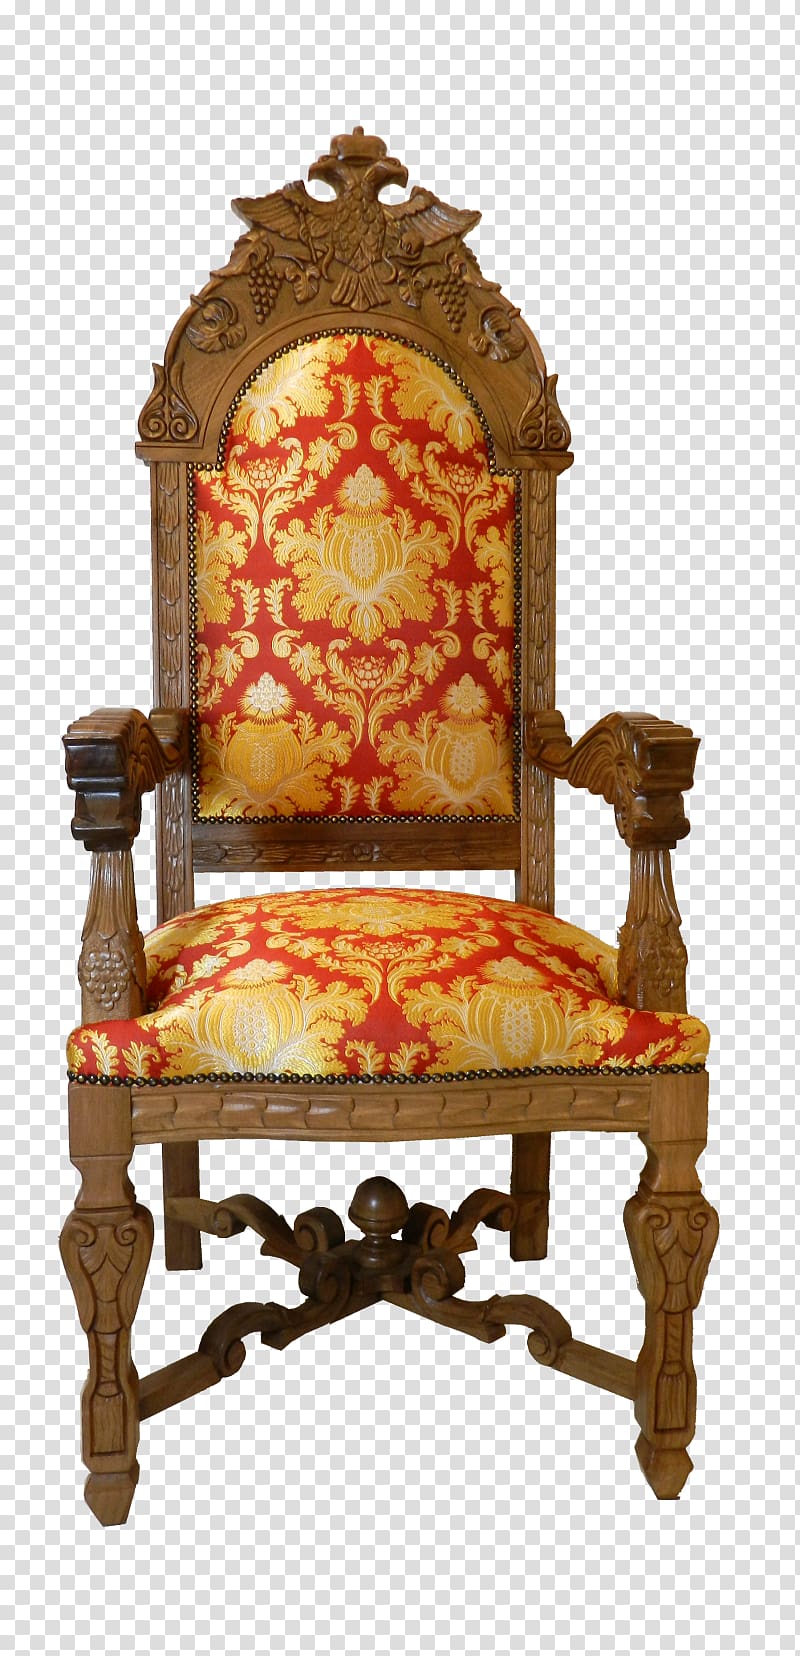 Throne Antique Garden furniture, misleading publicity will receive penalties transparent background PNG clipart